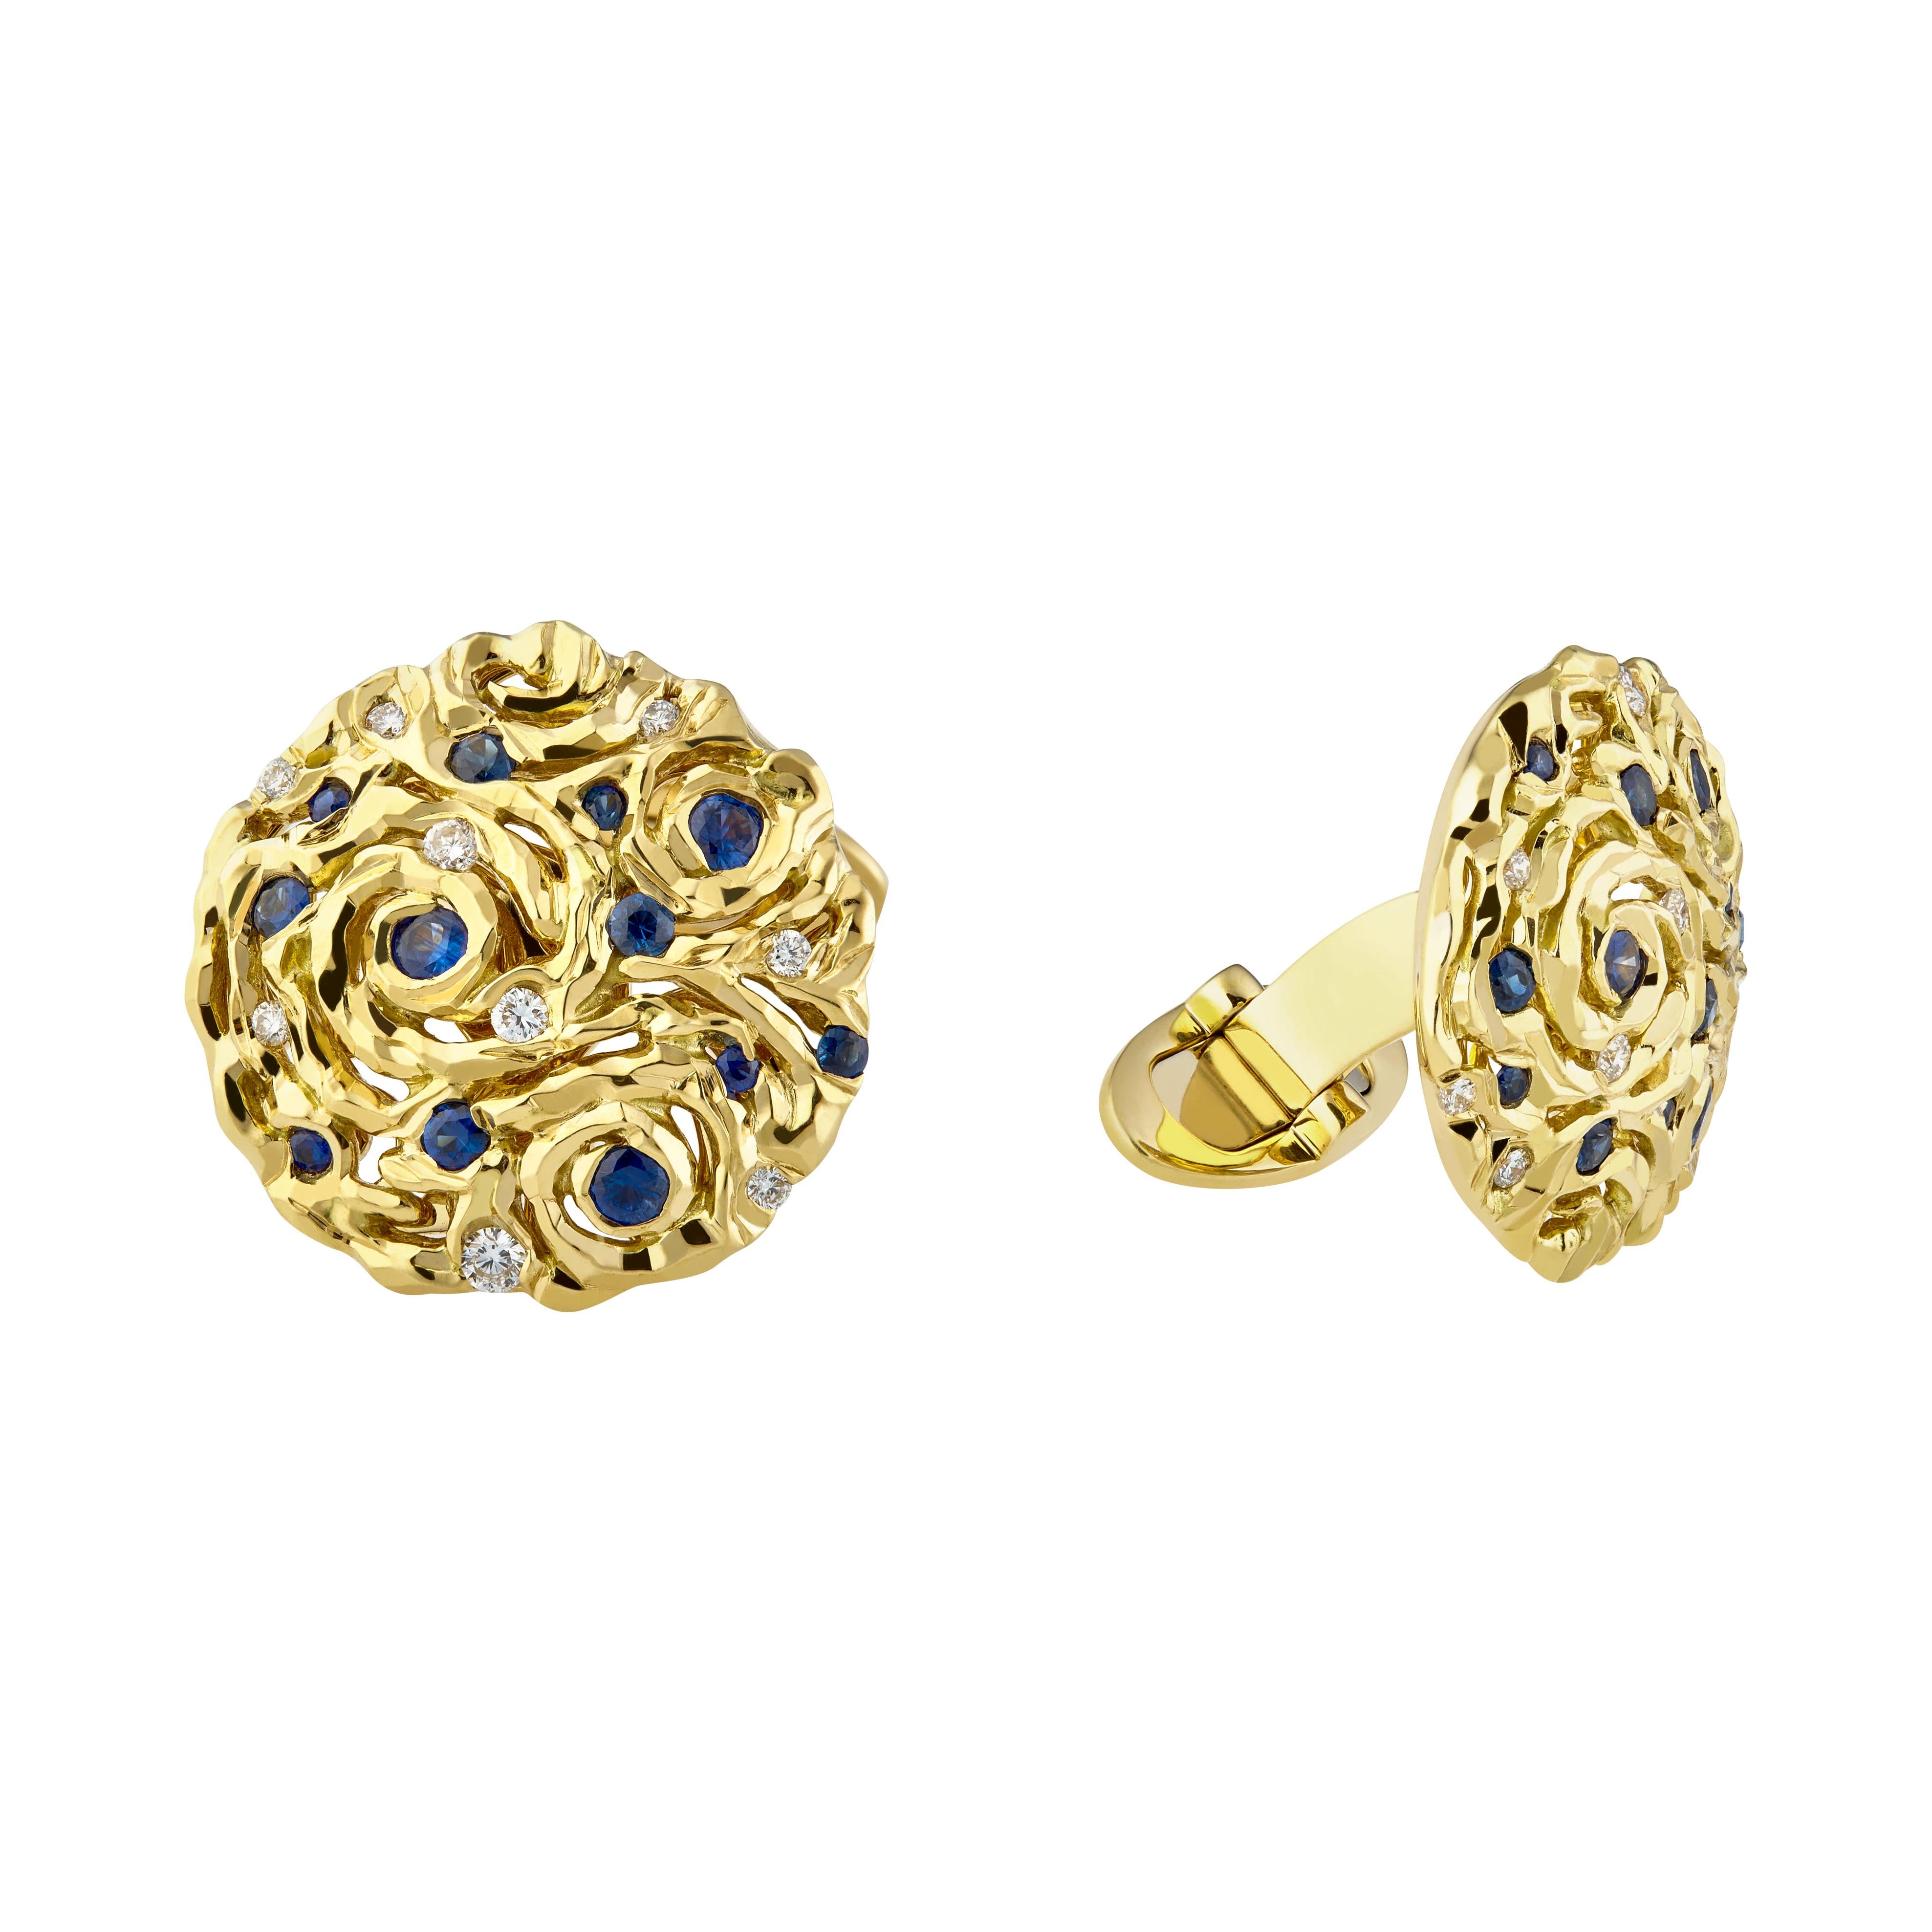 Inspired by impressionism and starry night painting of Vincent Van Gogh, MOISEIKIN has mastered creating golden swirling clouds with 18 karat gold and precious stones. Shining diamonds and sapphire stars on the refine gold filigree is fascinating,